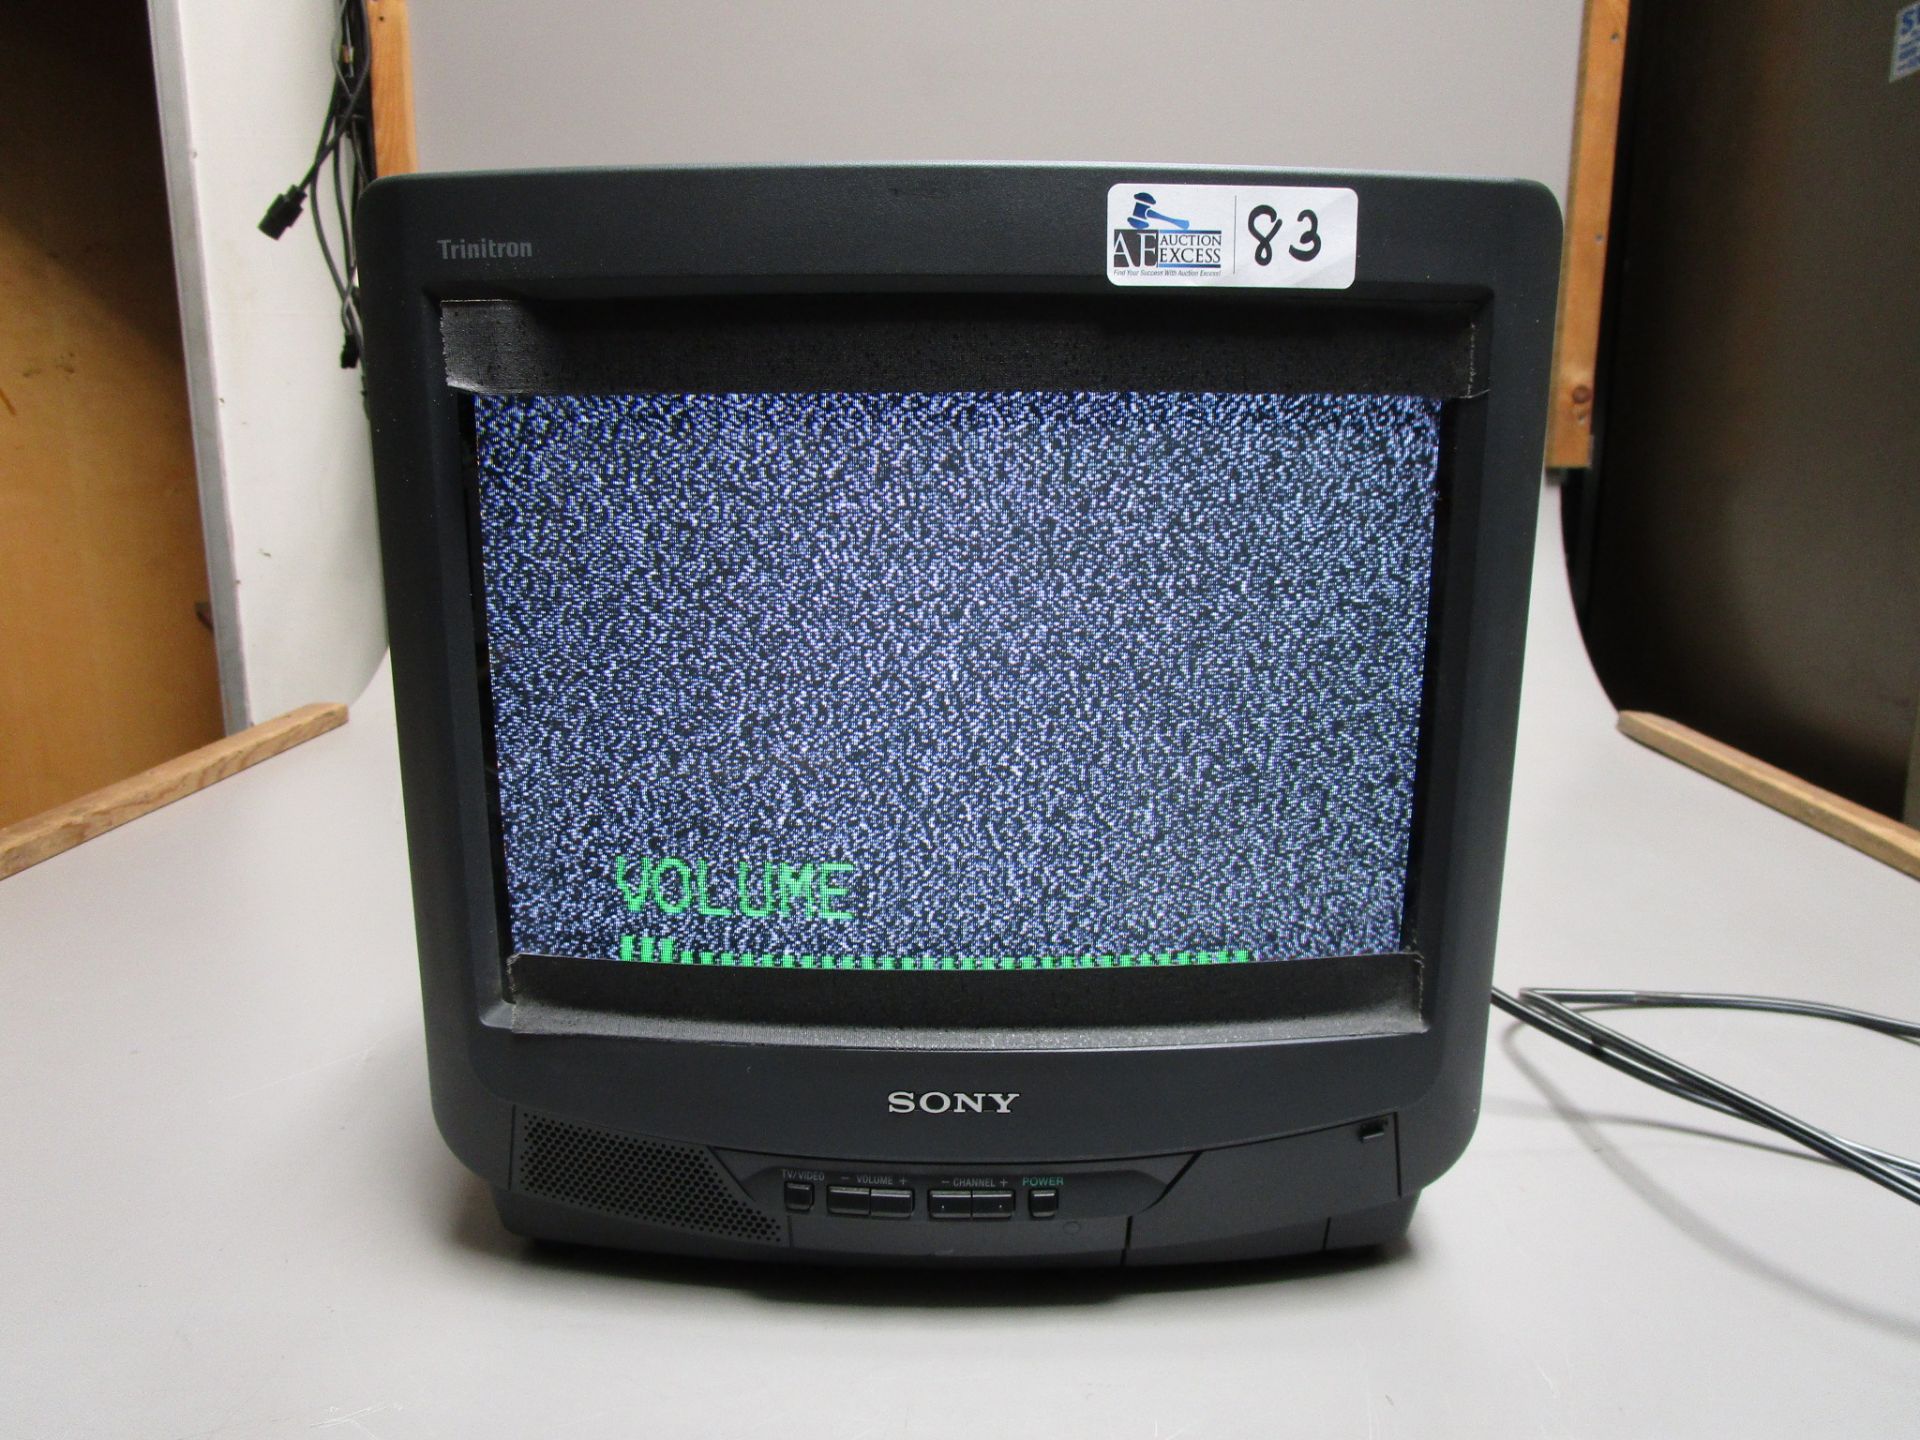 SONY COLOR TV